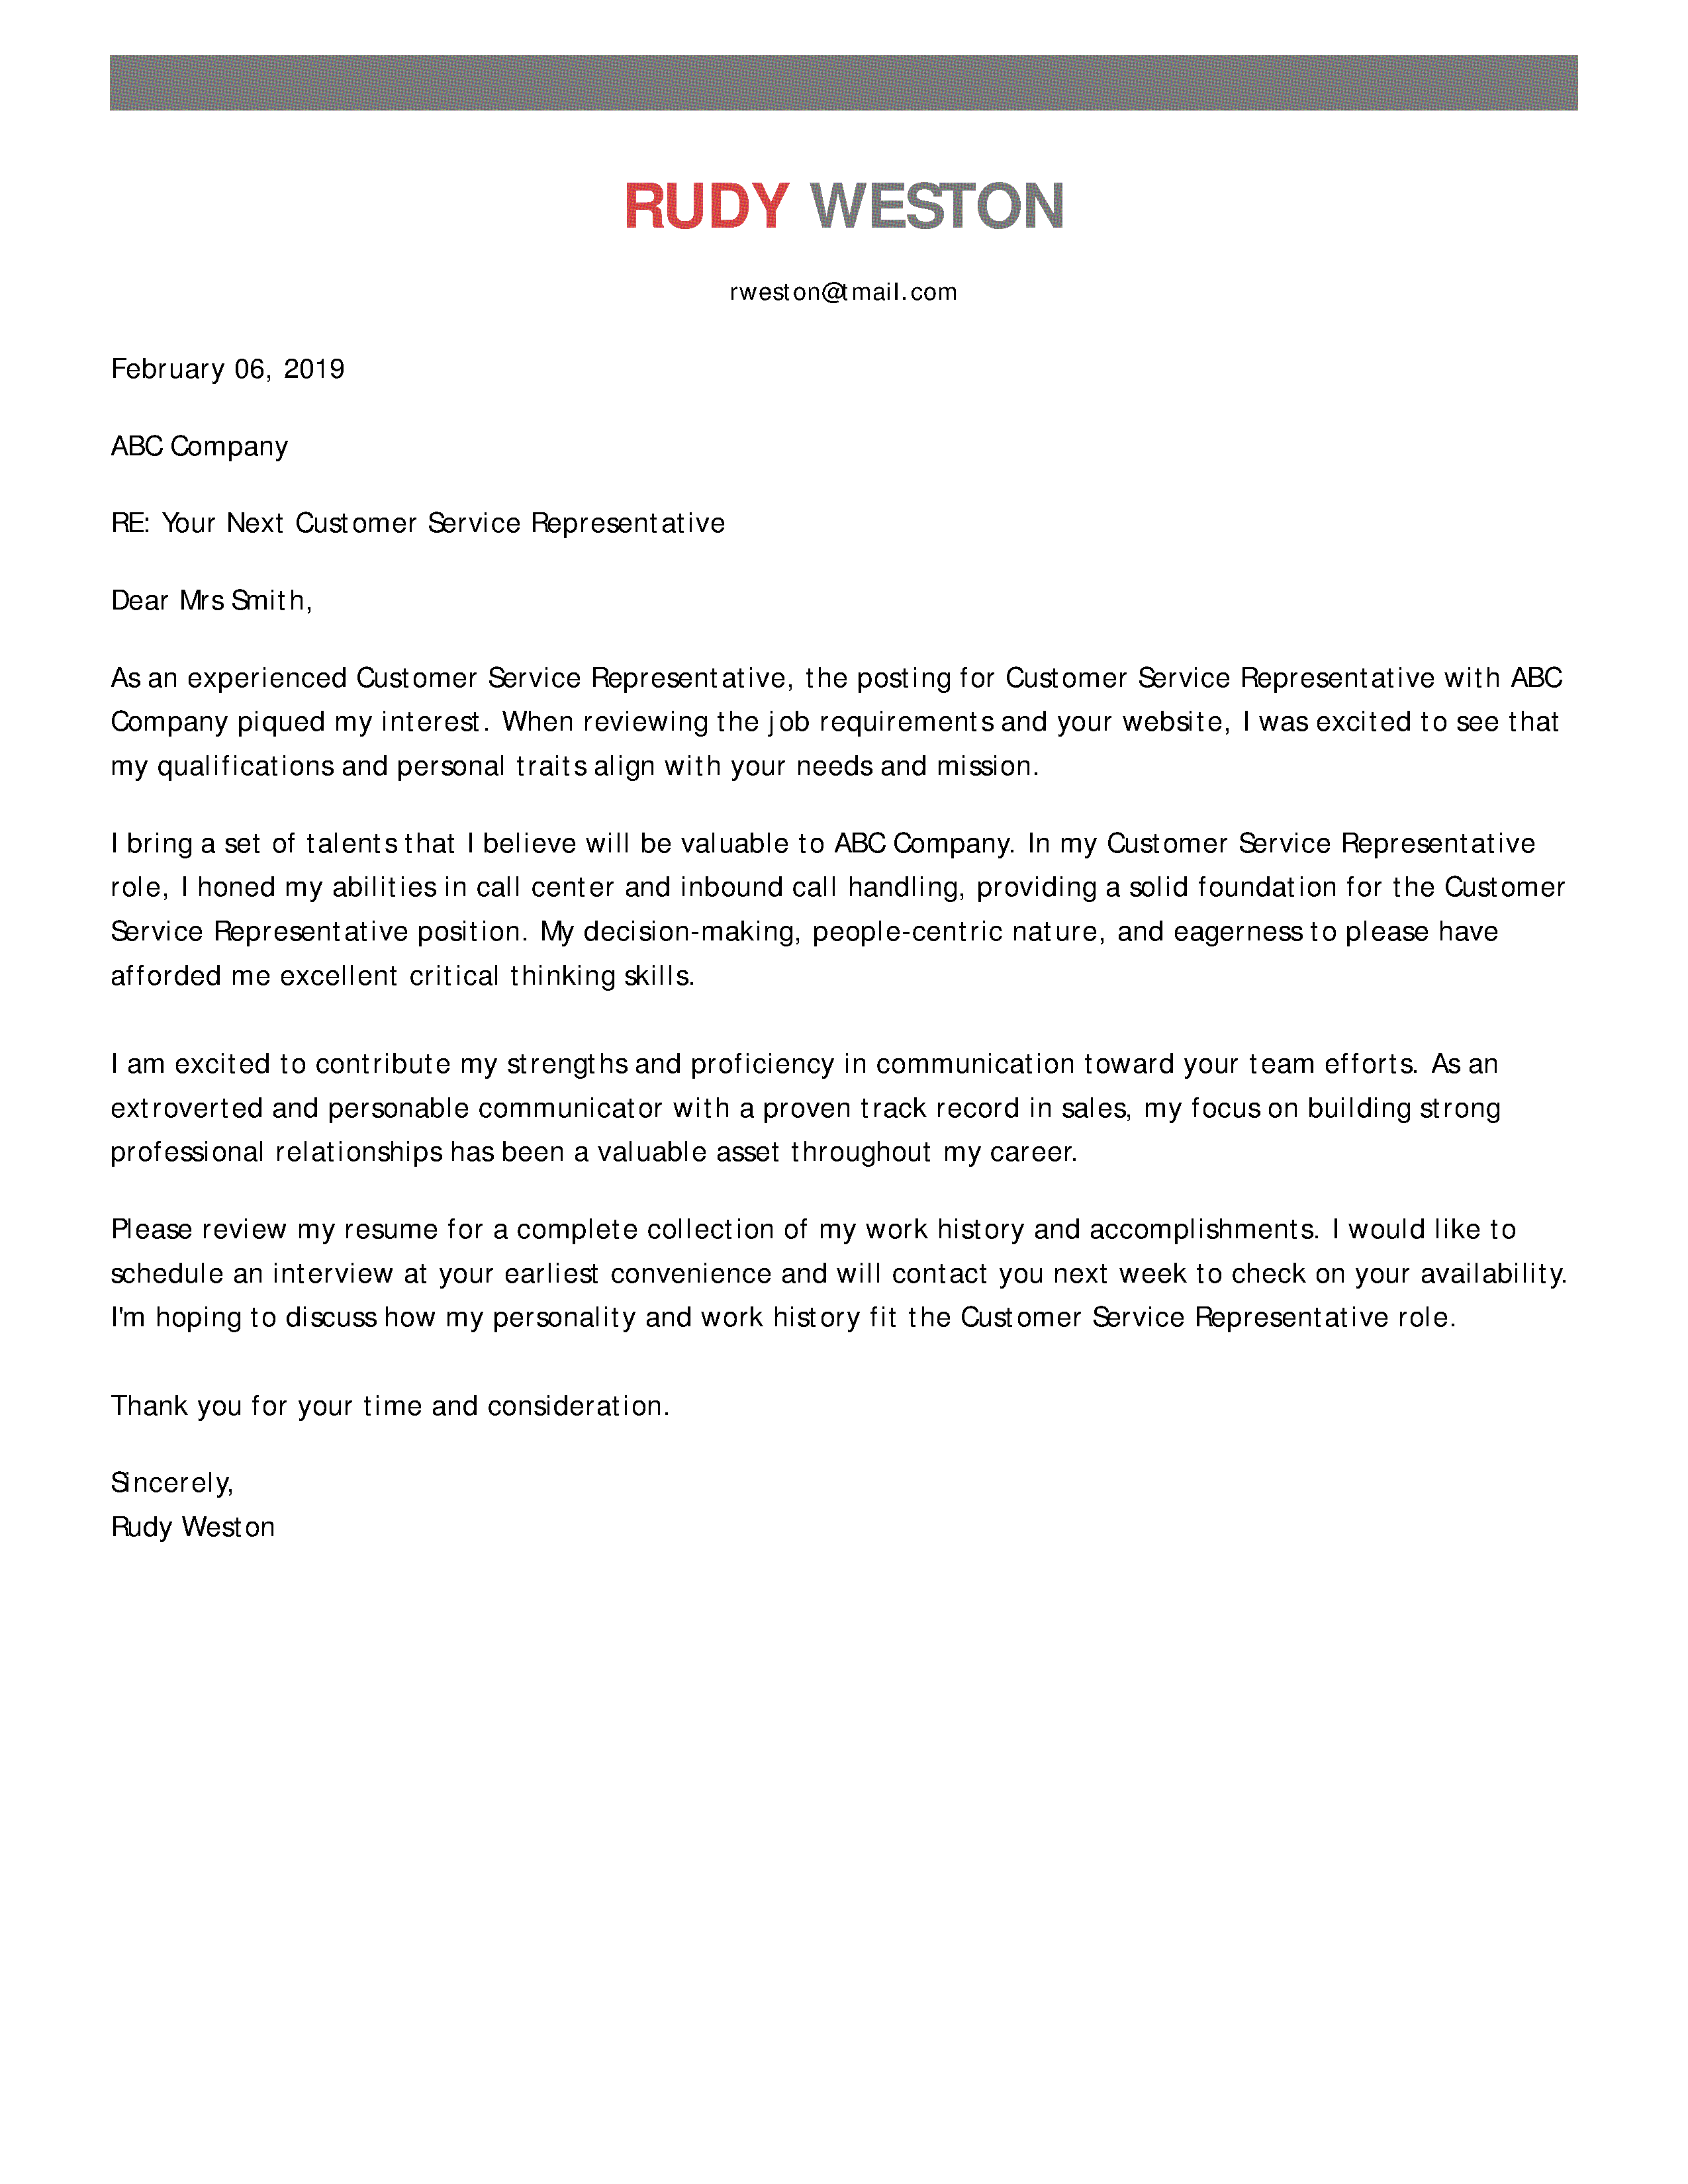 Cover letter format template